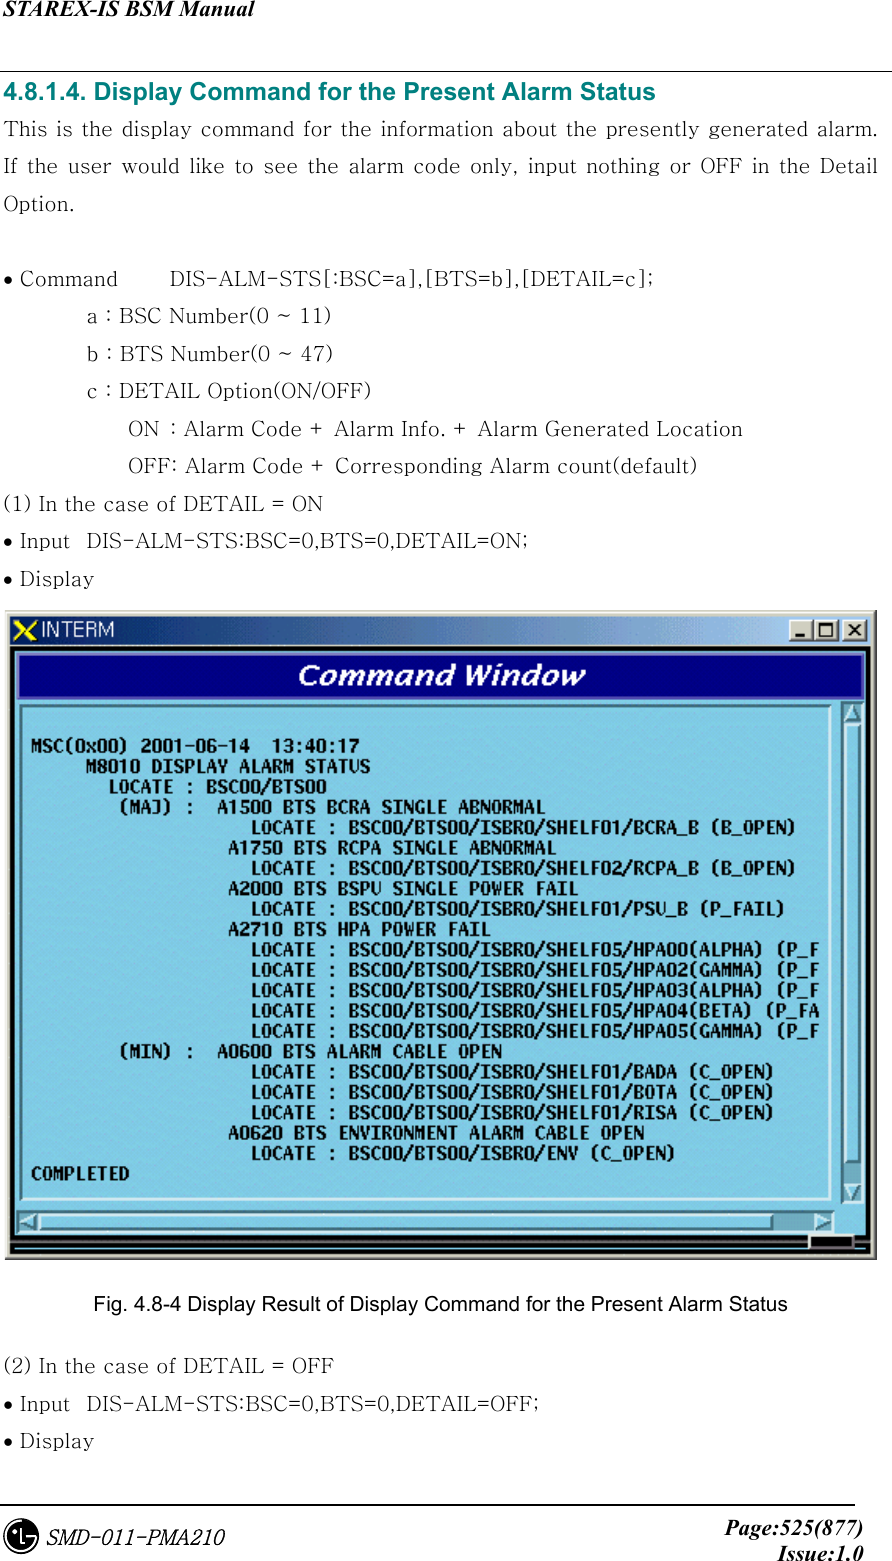 STAREX-IS BSM Manual     Page:525(877)Issue:1.0SMD-011-PMA210 4.8.1.4. Display Command for the Present Alarm Status This is the display command for the information about the presently generated alarm. If the  user would like  to  see  the alarm  code only, input  nothing or OFF in the Detail Option.  • Command  DIS-ALM-STS[:BSC=a],[BTS=b],[DETAIL=c];           a : BSC Number(0 ~ 11) b : BTS Number(0 ~ 47) c : DETAIL Option(ON/OFF) ON  : Alarm Code + Alarm Info. + Alarm Generated Location OFF: Alarm Code + Corresponding Alarm count(default) (1) In the case of DETAIL = ON   • Input  DIS-ALM-STS:BSC=0,BTS=0,DETAIL=ON; • Display  Fig. 4.8-4 Display Result of Display Command for the Present Alarm Status (2) In the case of DETAIL = OFF   • Input  DIS-ALM-STS:BSC=0,BTS=0,DETAIL=OFF; • Display 